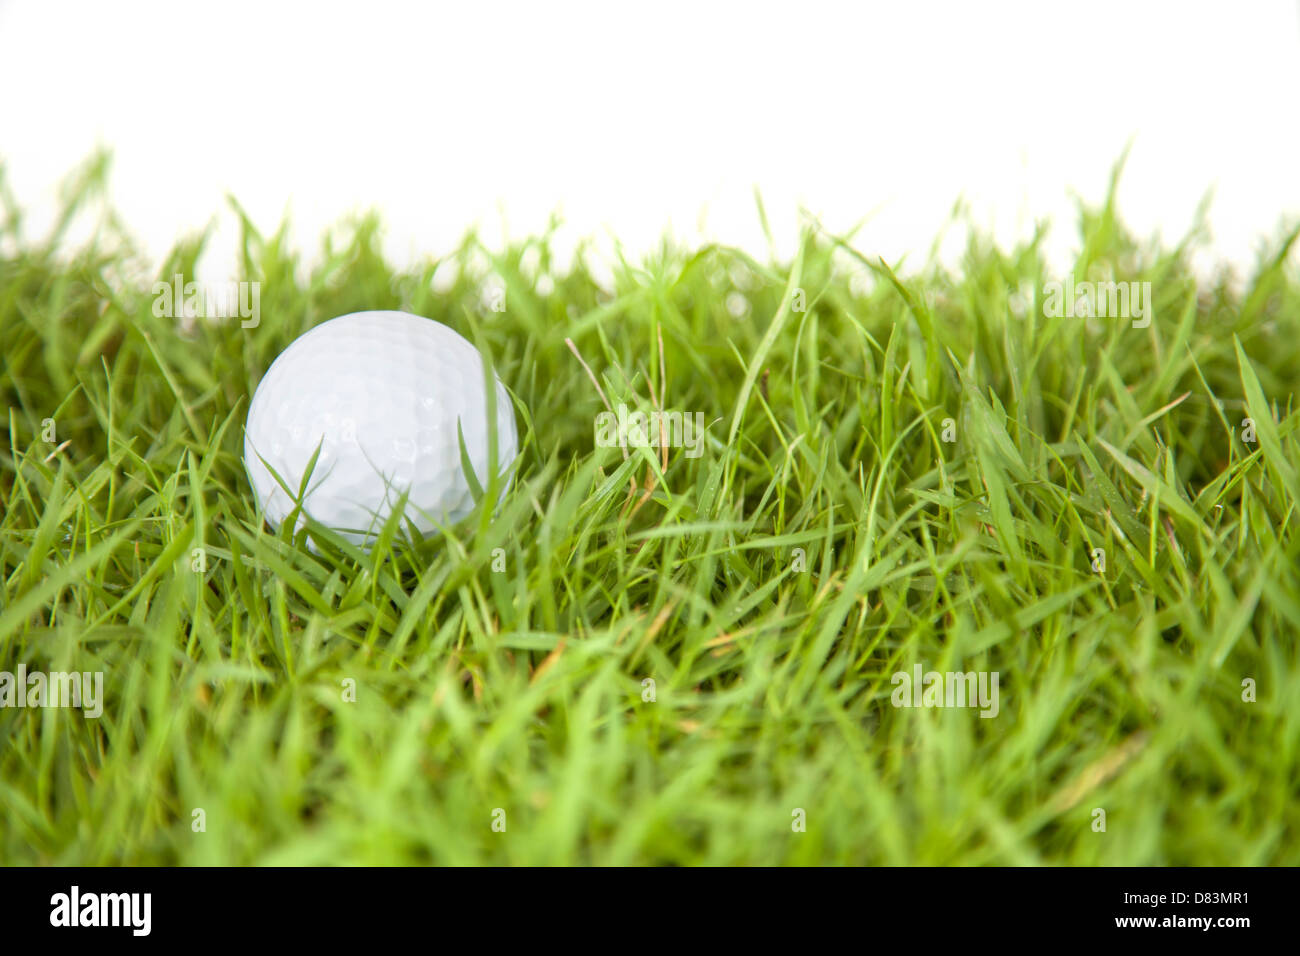 Close-up of golf ball in rough grass Stock Photo